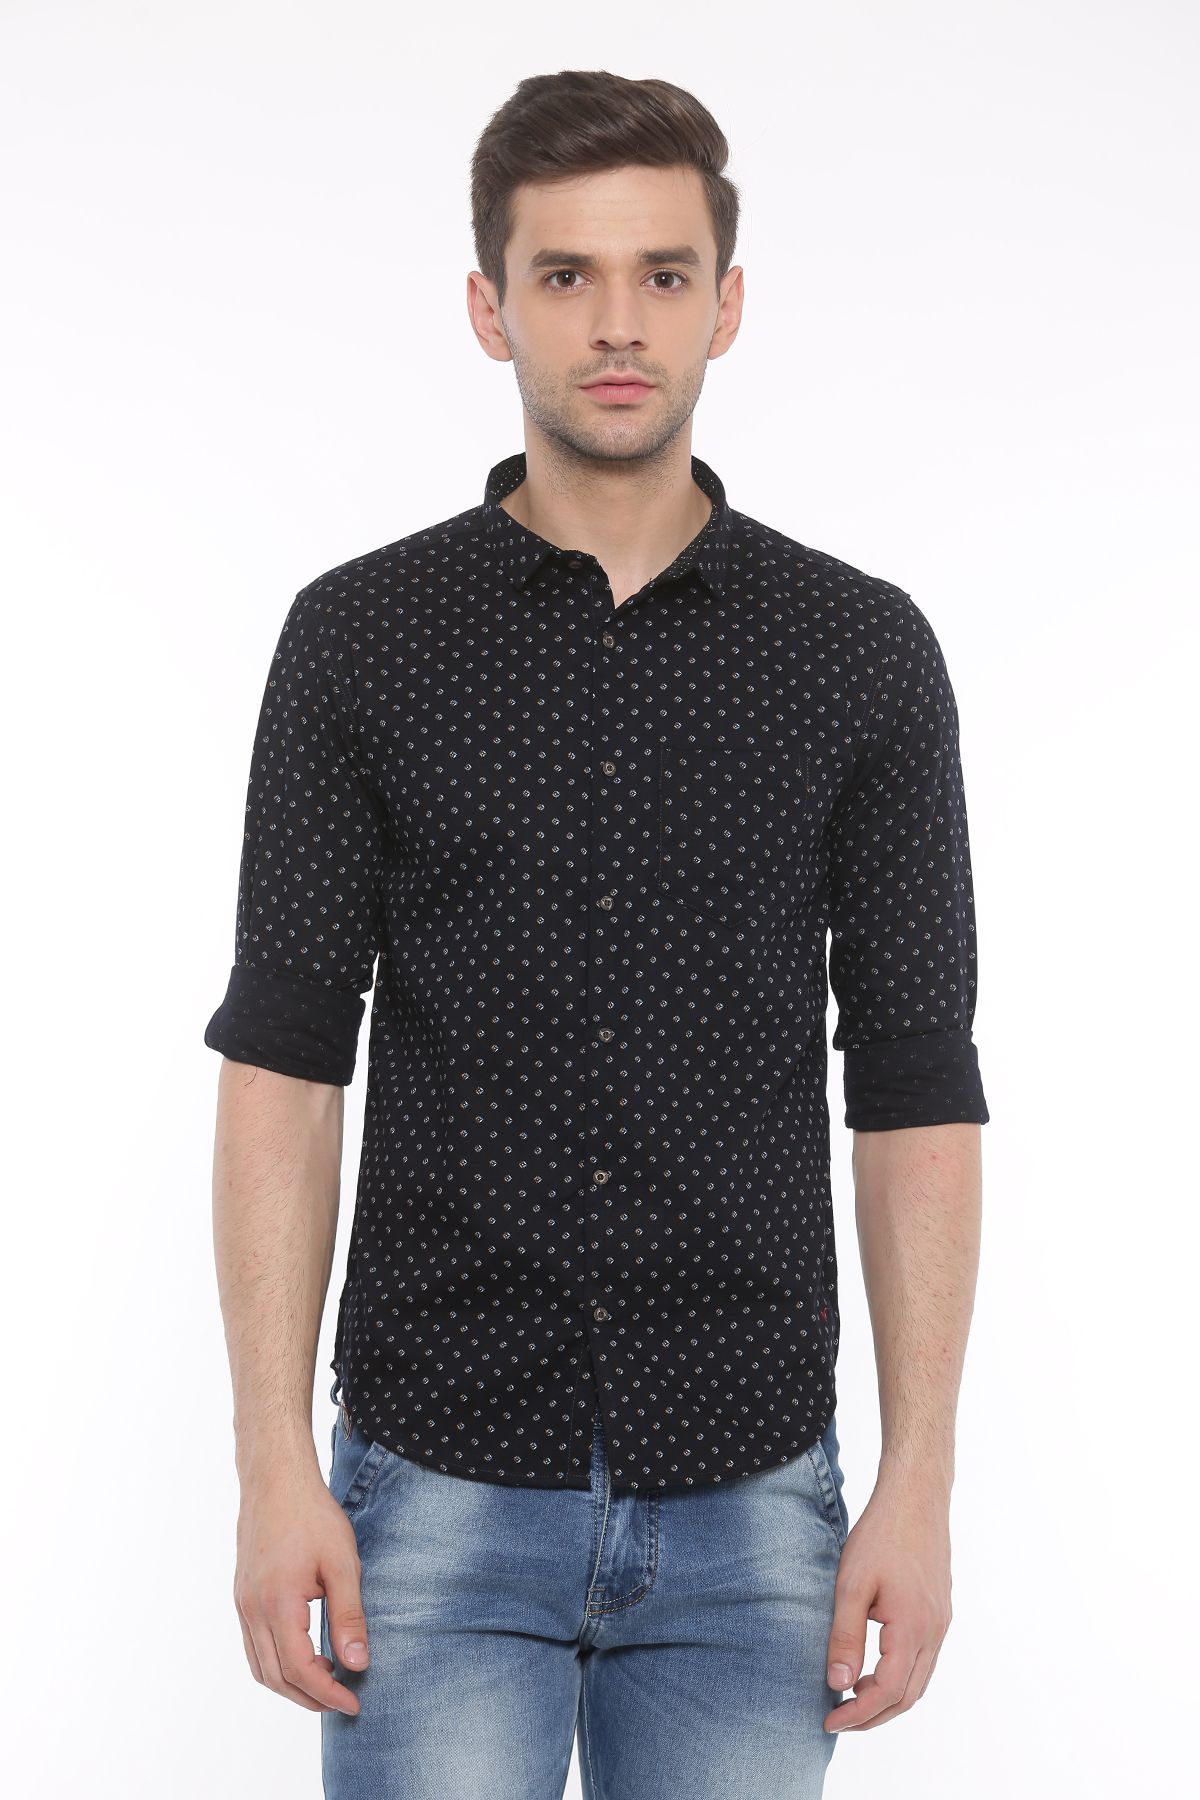 WITH Black Casual Slim Fit Shirt - Buy WITH Black Casual Slim Fit Shirt ...